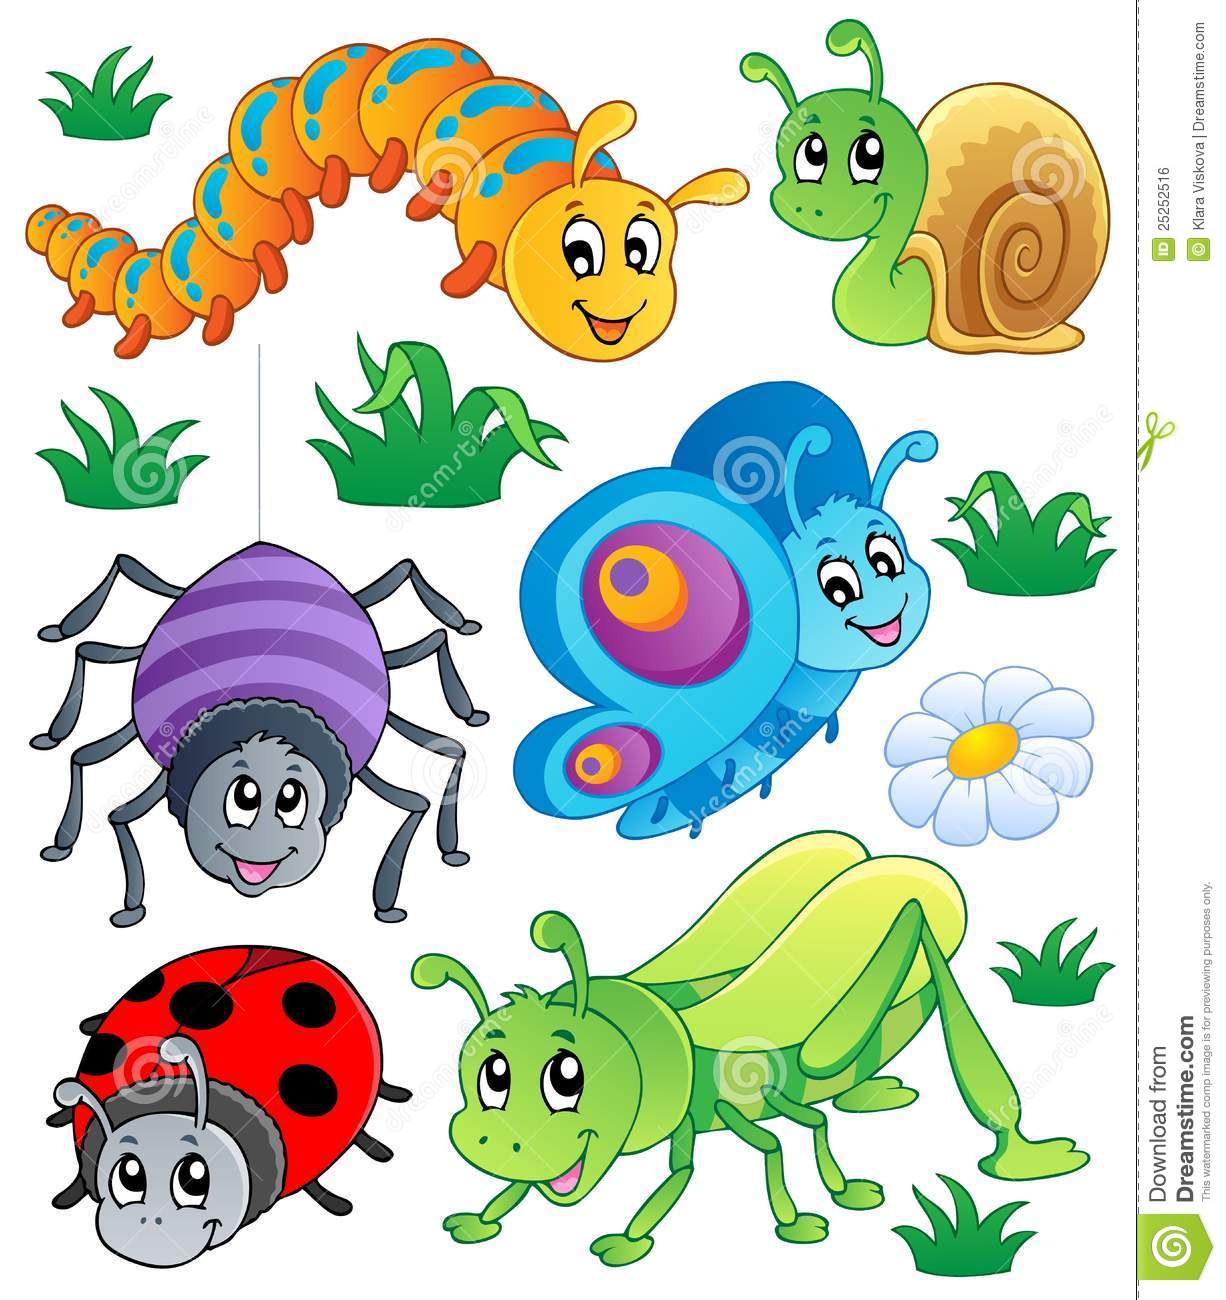 Cute Bugs Collection 1 Royalty Free Stock Image   Image  25252516